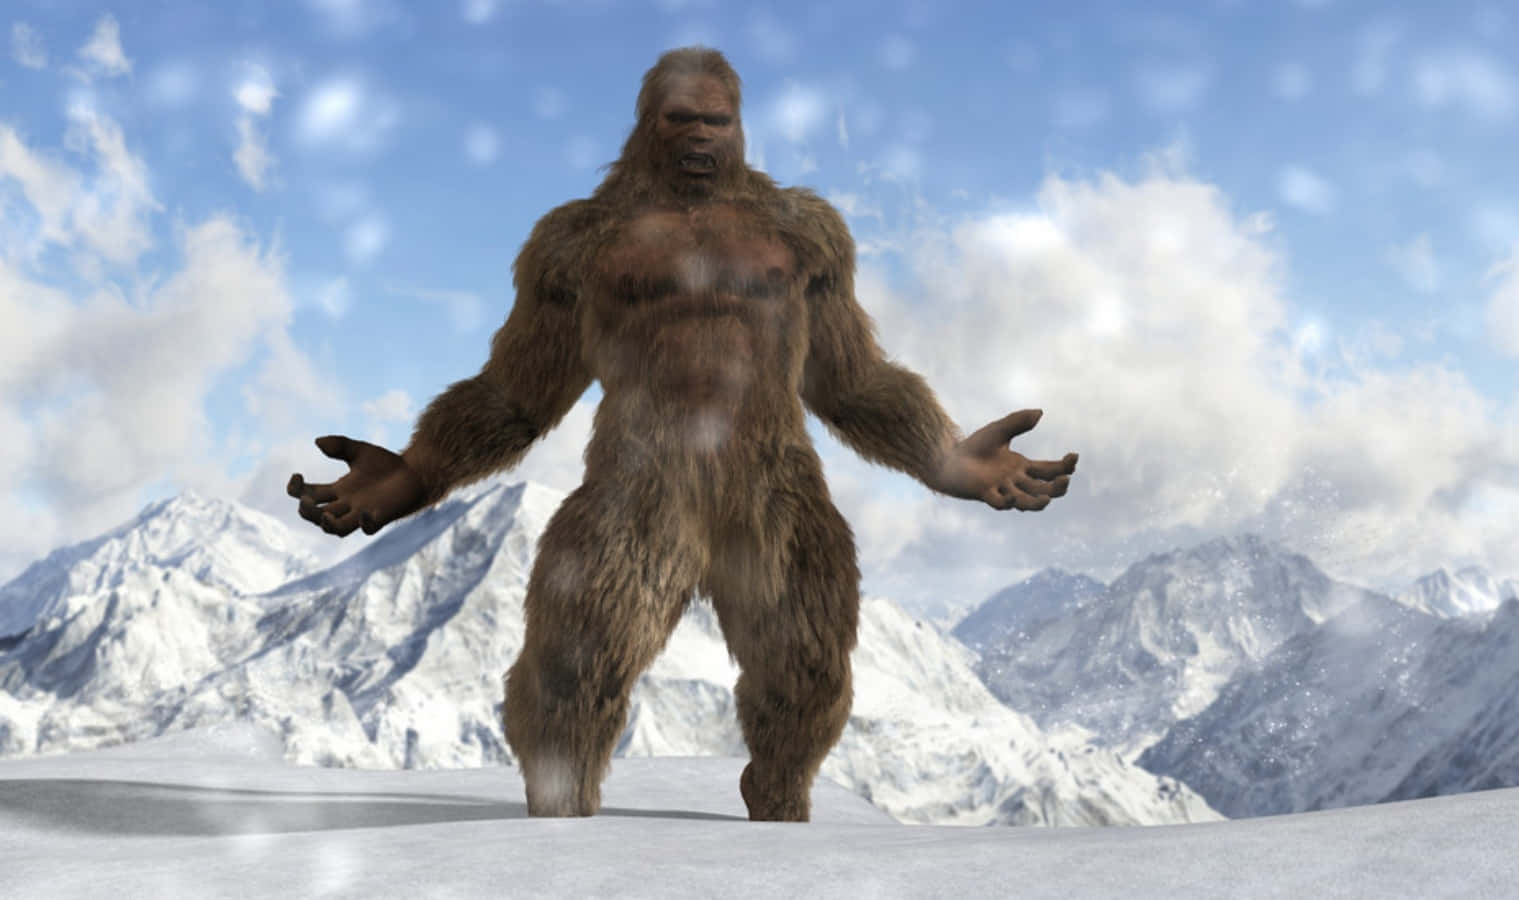 A mysterious figure of legend, Bigfoot is said to inhabit the remote forests of North America.